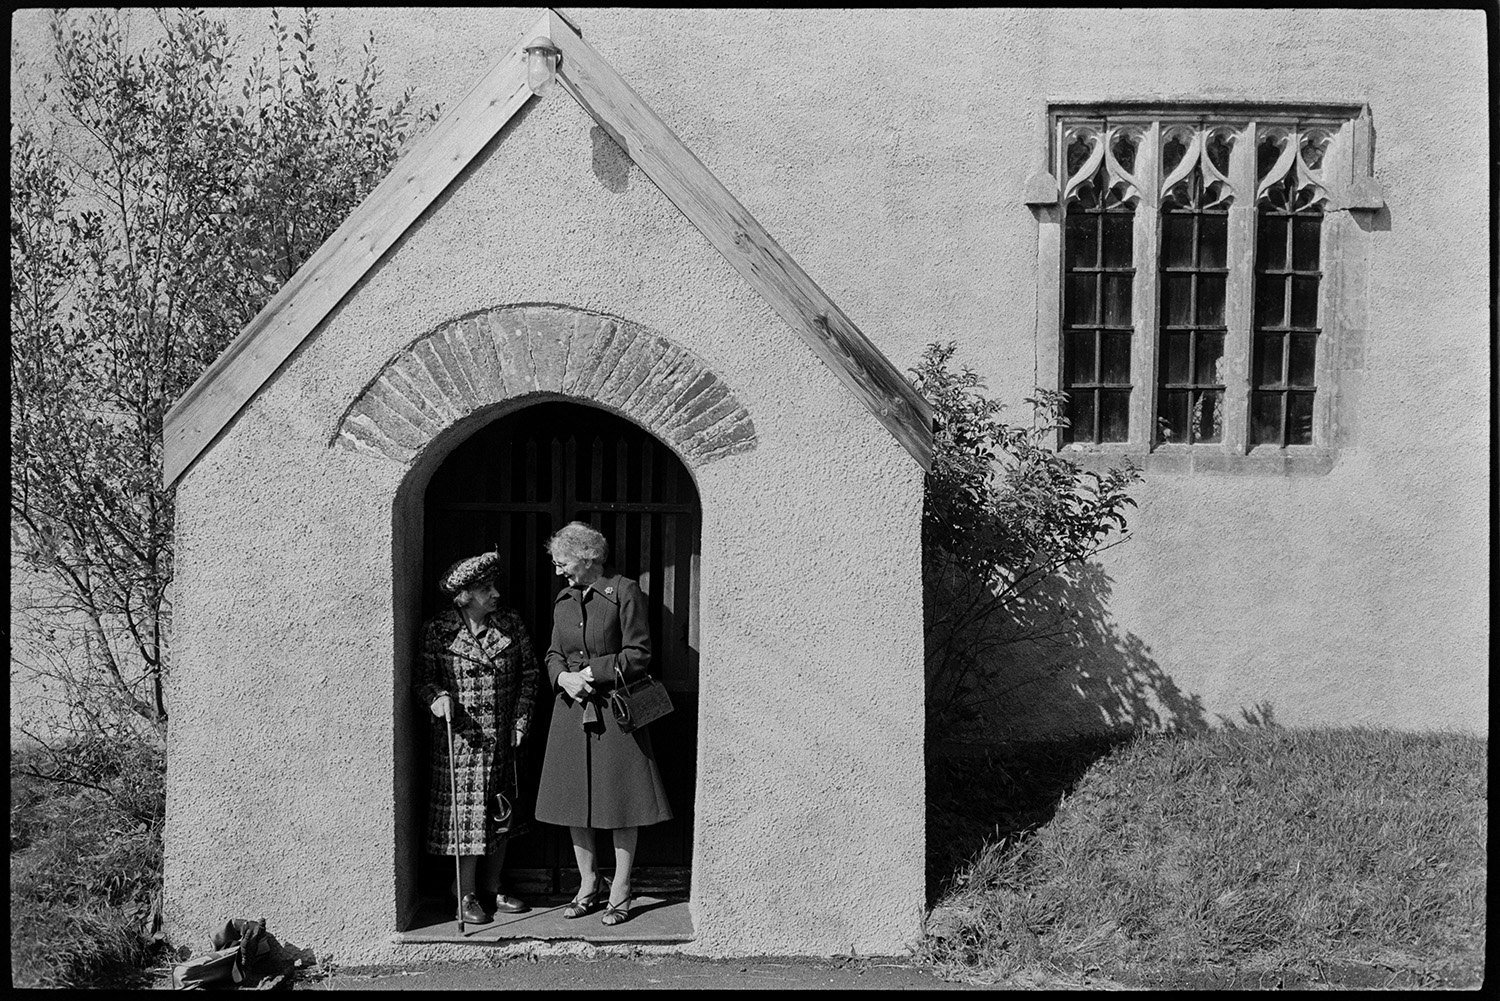 People going into church, clothes, Sunday best dresses and suits, church porch and window. 
[Two women dressed in smart coats and hats, one with a walking stick, standing and chatting in the porch of the Church of St. Peter, Dowland, after attending the Harvest Festival. Details of the window to the right of the porch can be seen.]